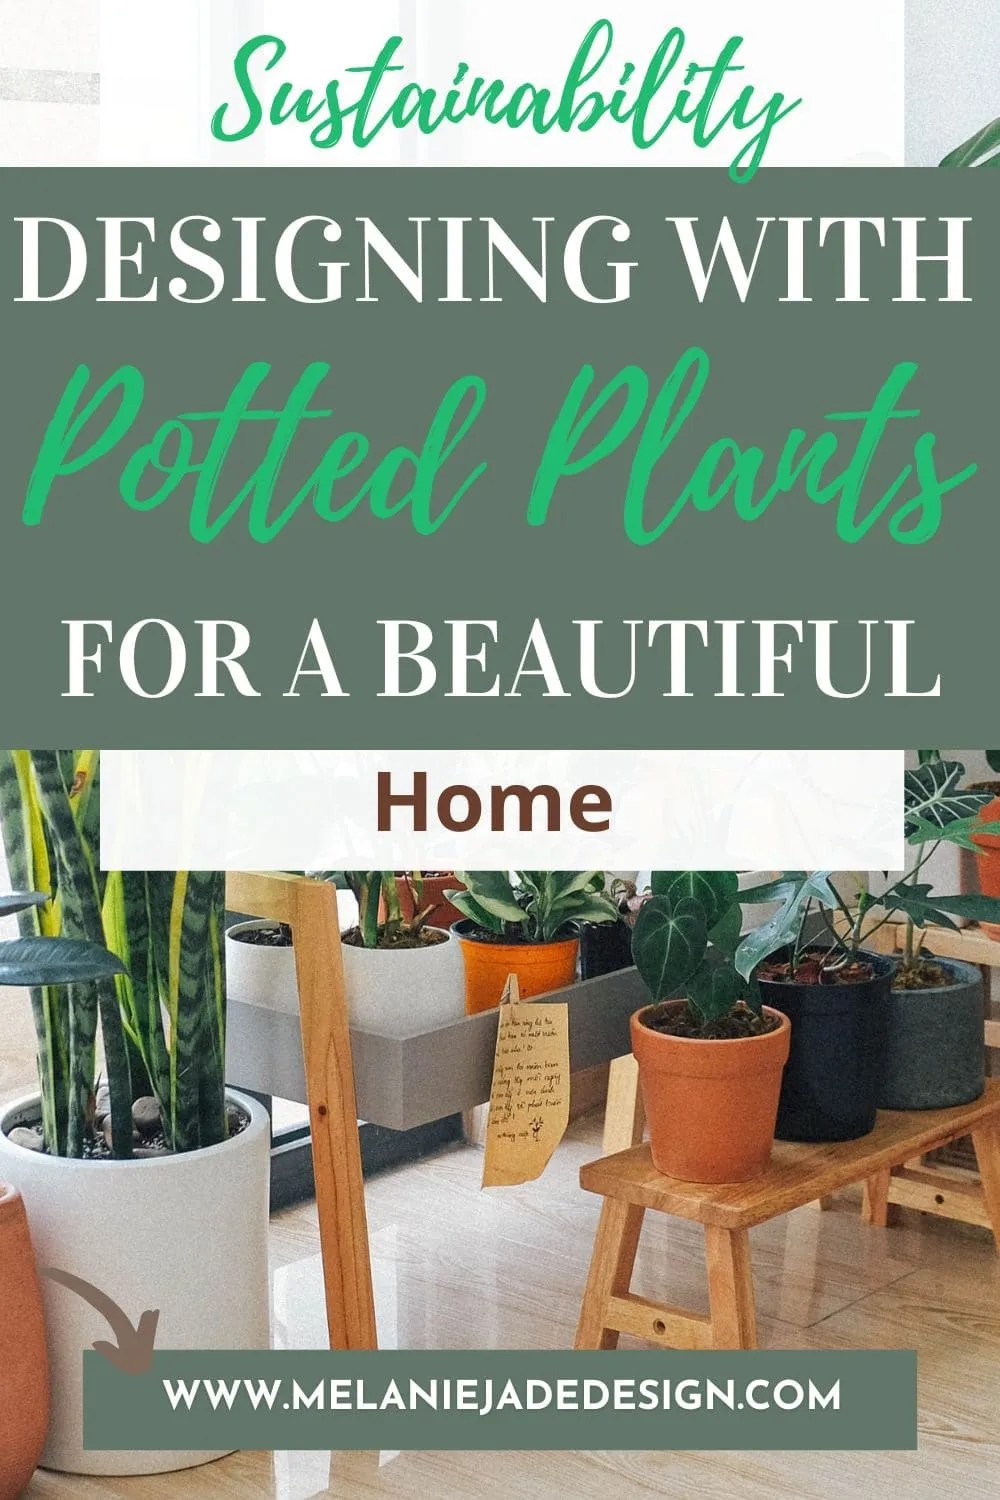 From Seeds to Style: Designing with Potted Plants for a Beautiful Home Pinterest pin